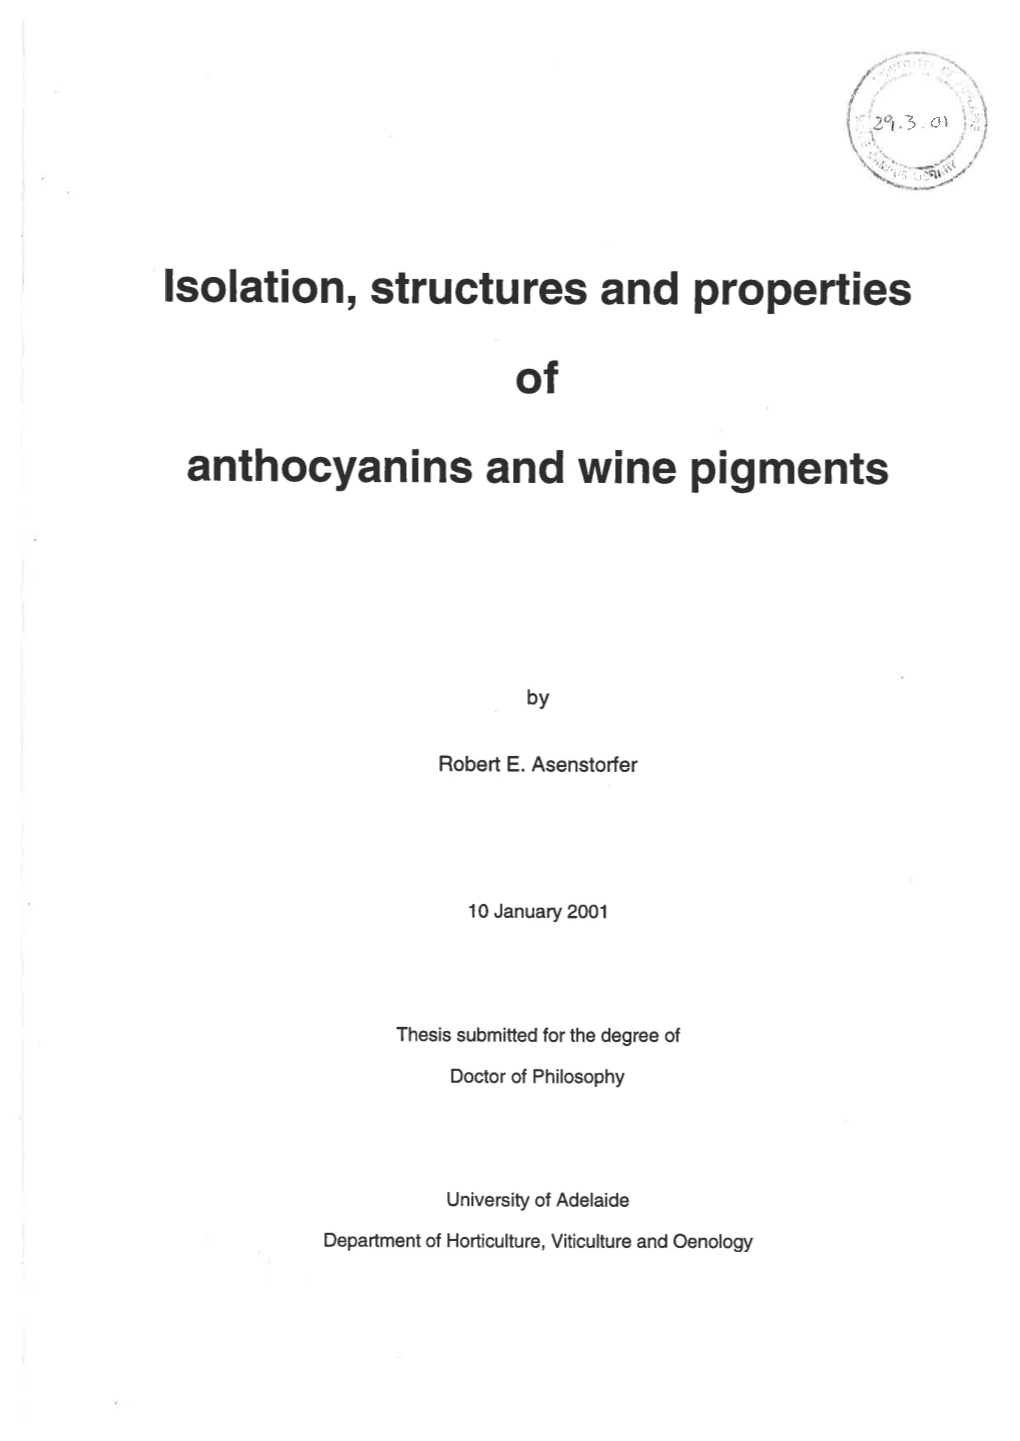 Isolation, Structures and Properties of Anthocyanins and Wine Pigments